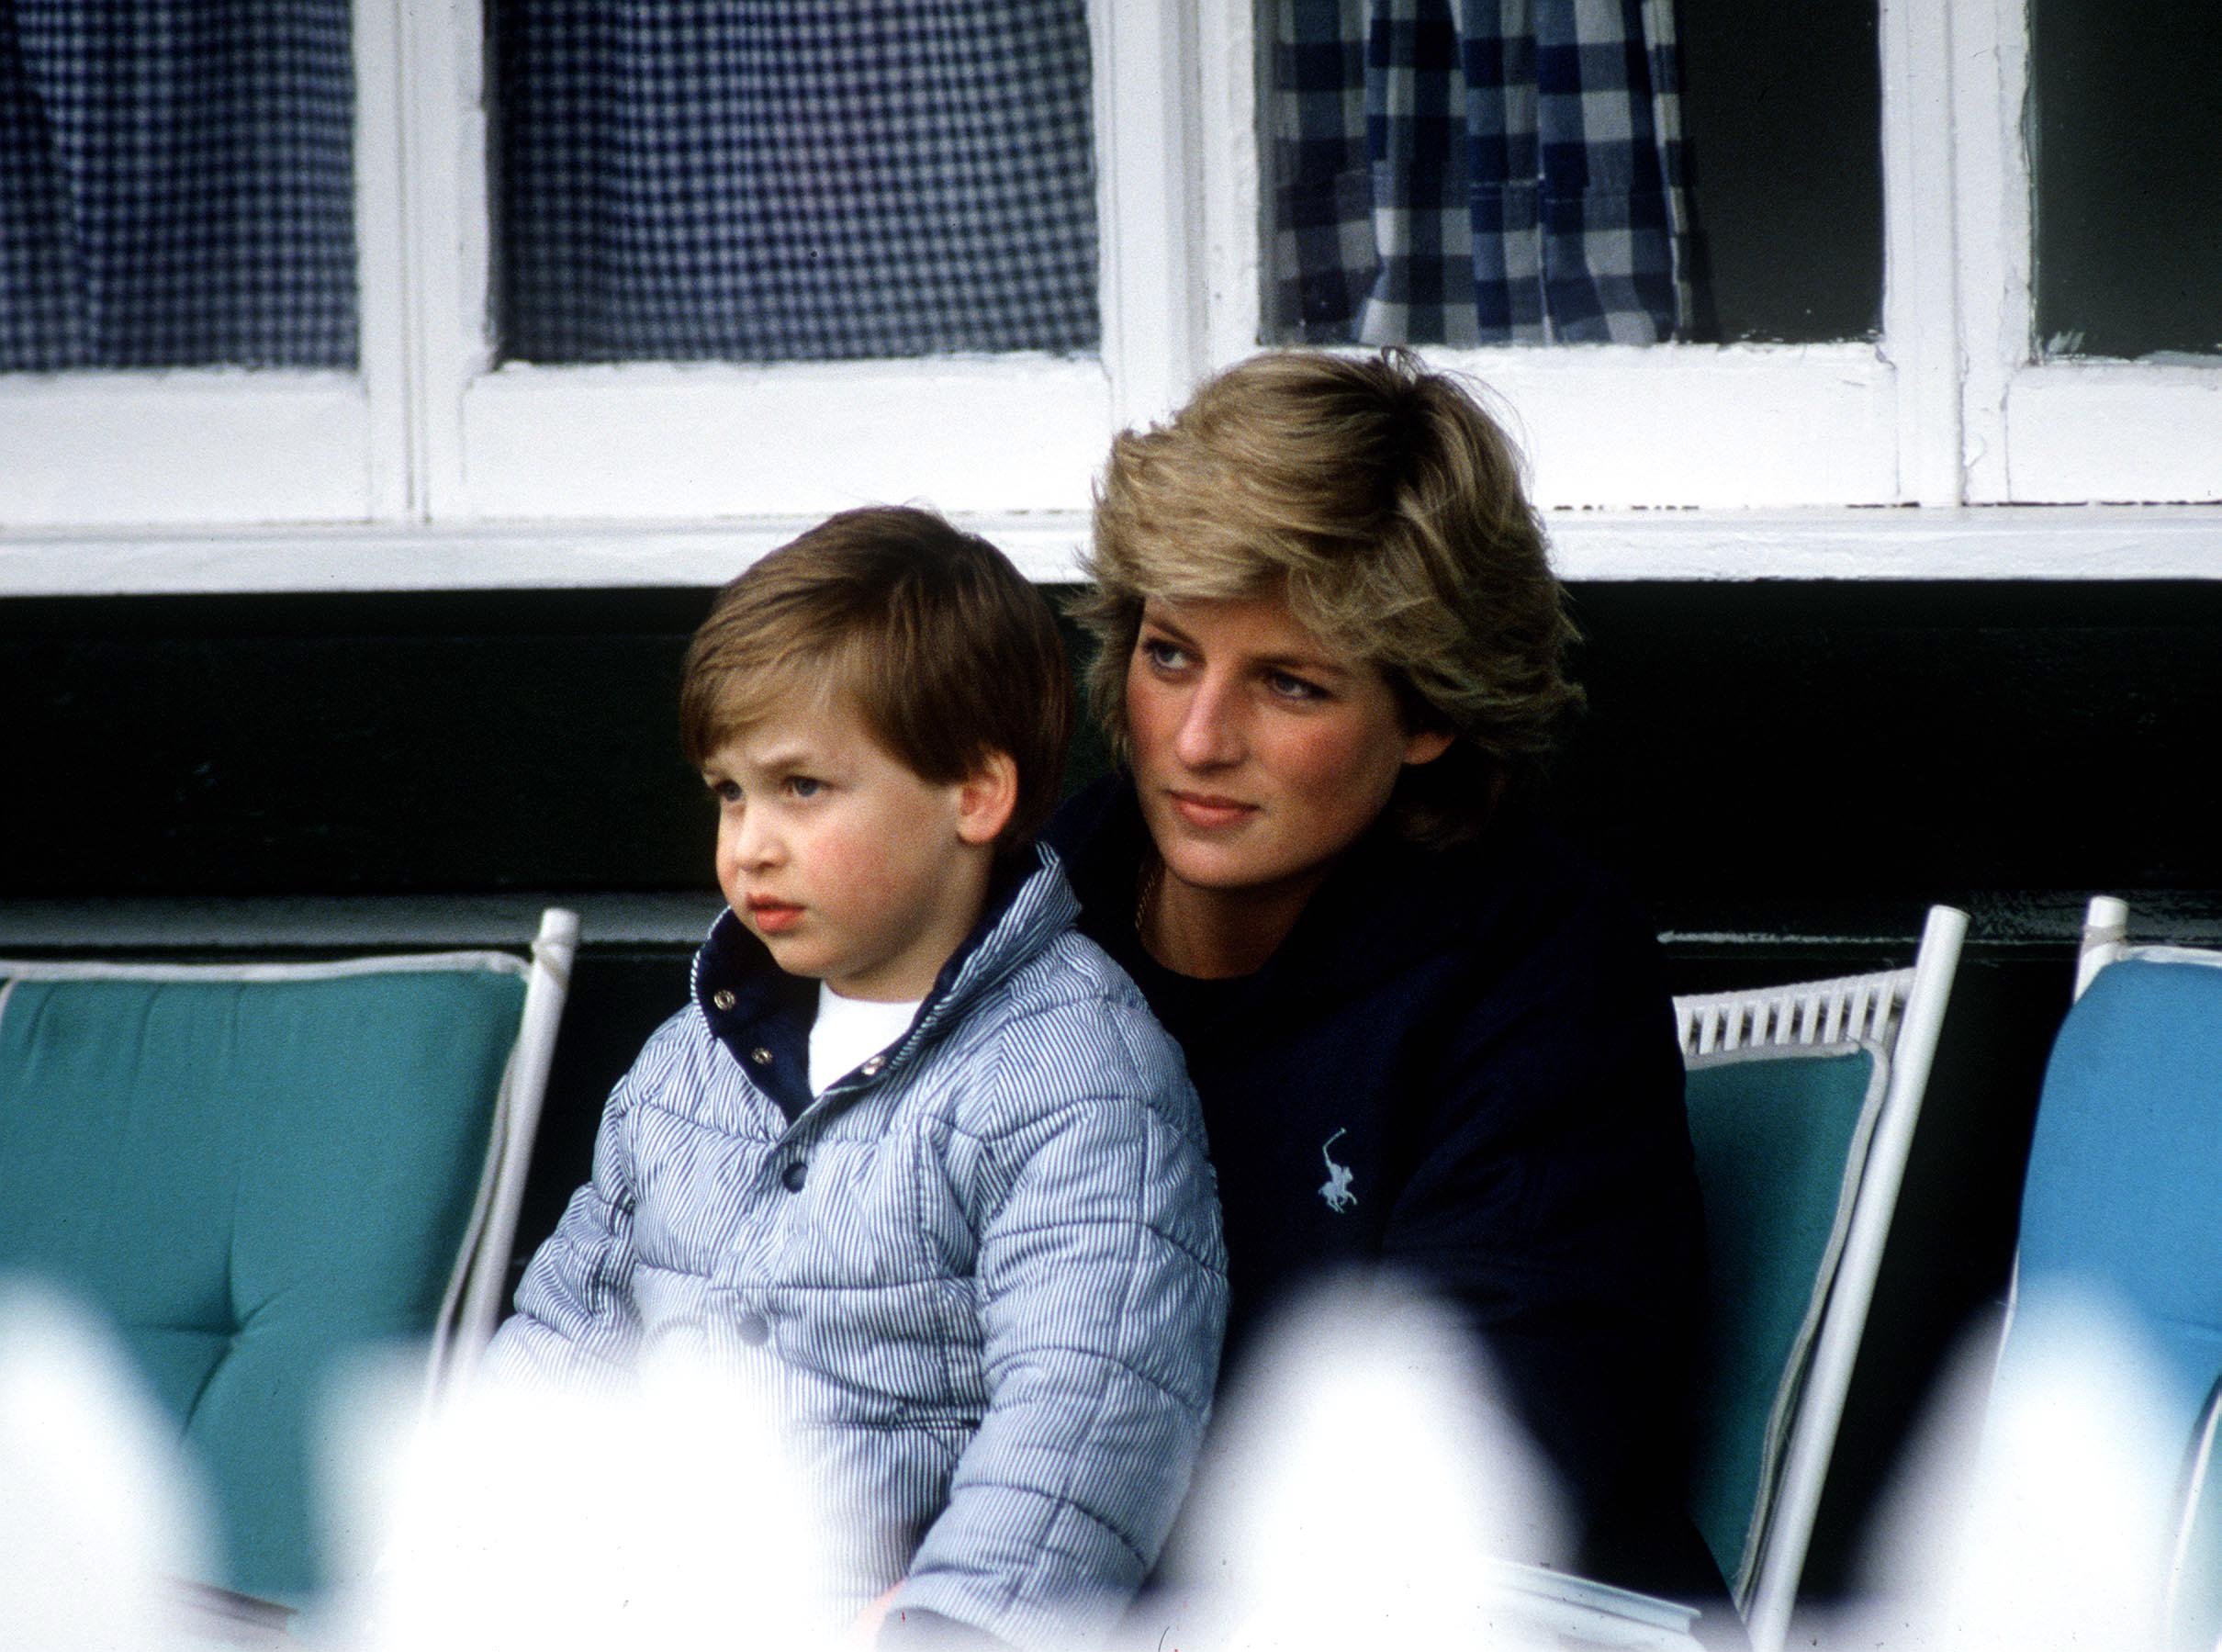 Princess of Wales, Diana with her eldest son Prince William sitting on her lap at Polo in Windsor, United Kingdom. / Source: Getty Images